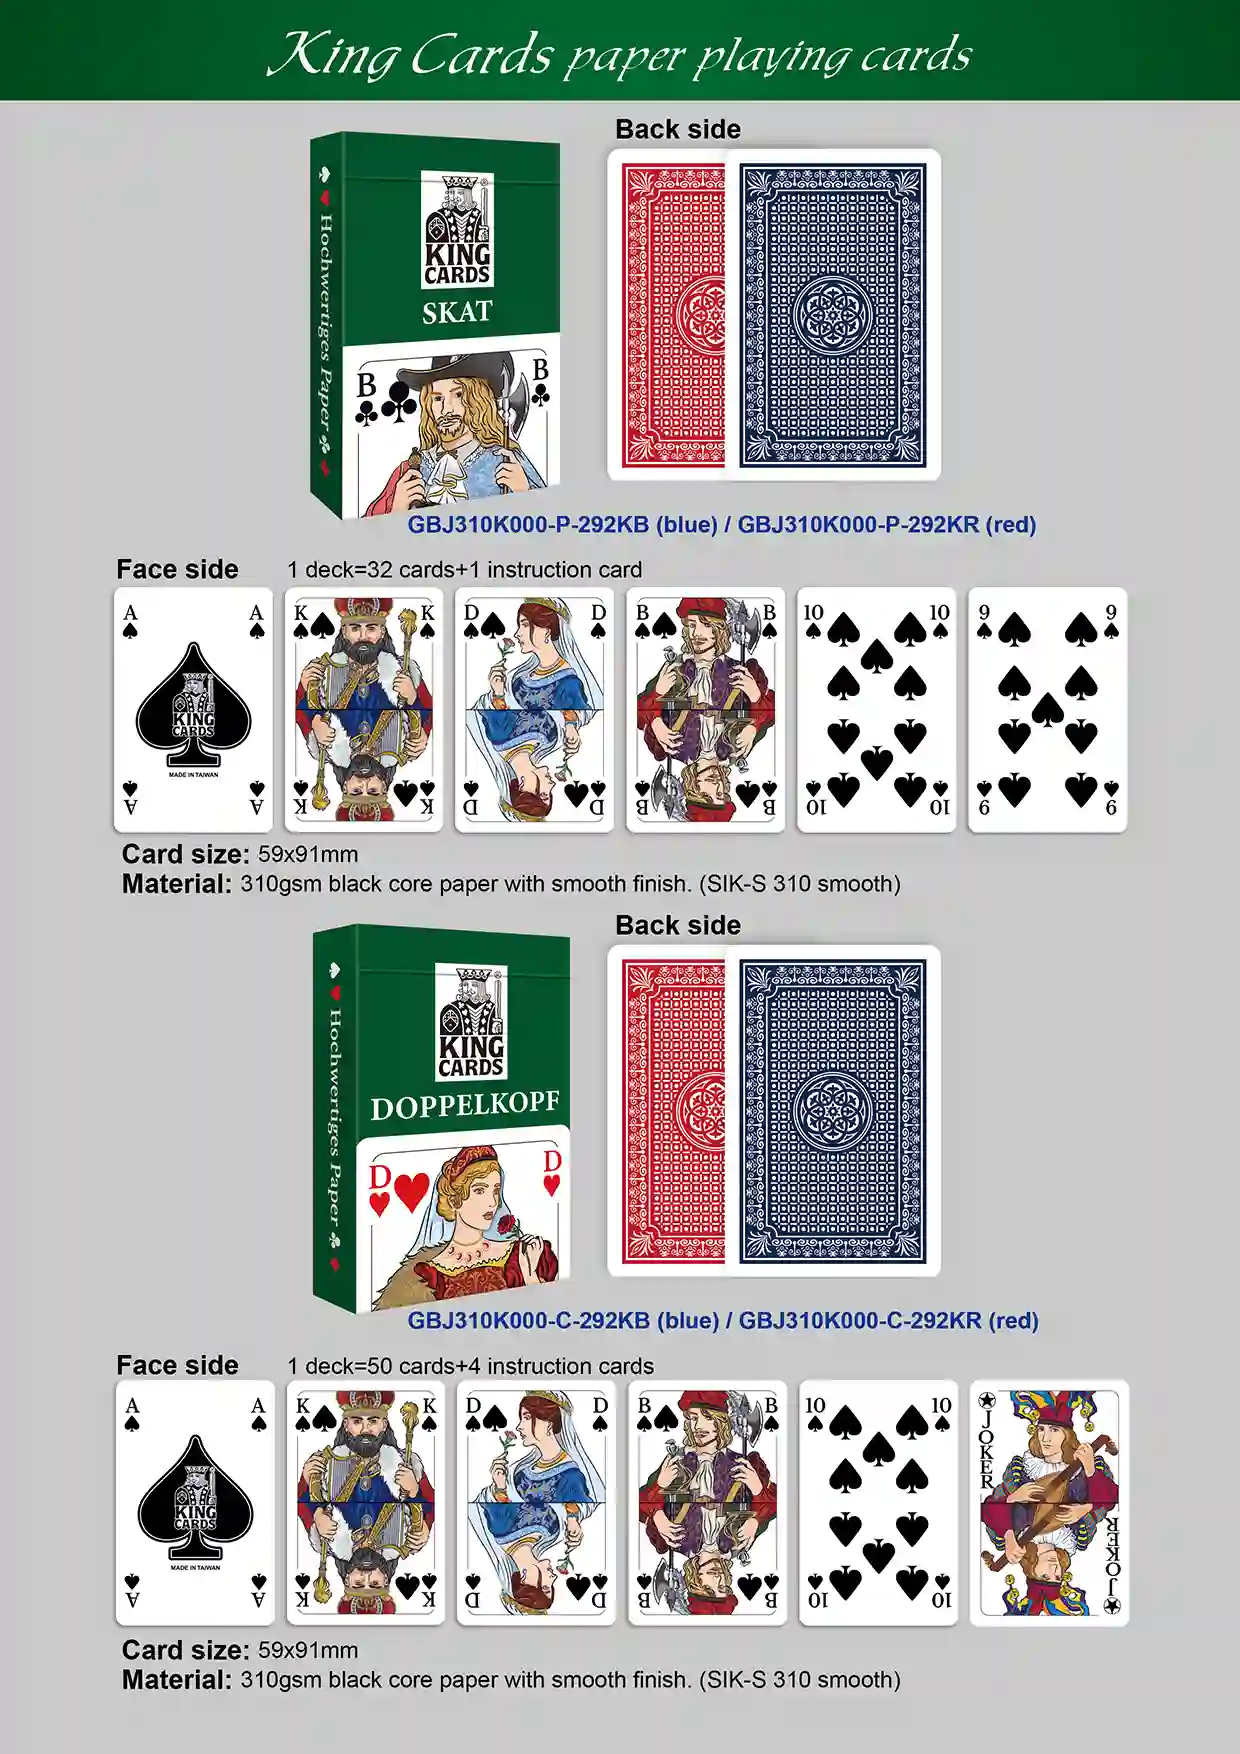 German Party Card Game Doppelkopf Playing Game Cards